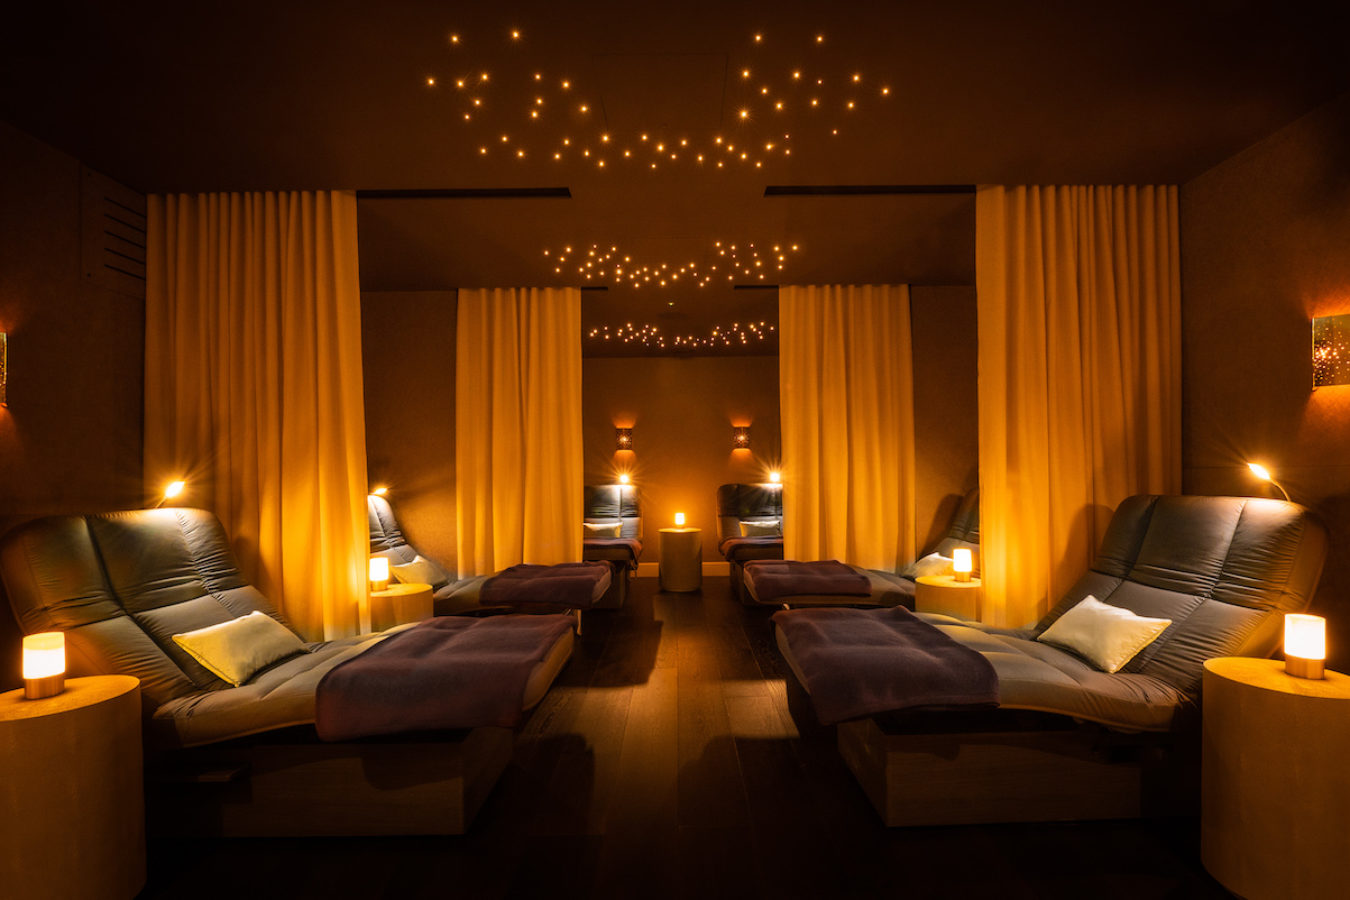 Review - A Fabulous New Spa Experience Awaits in a Fairytale Irish Castle